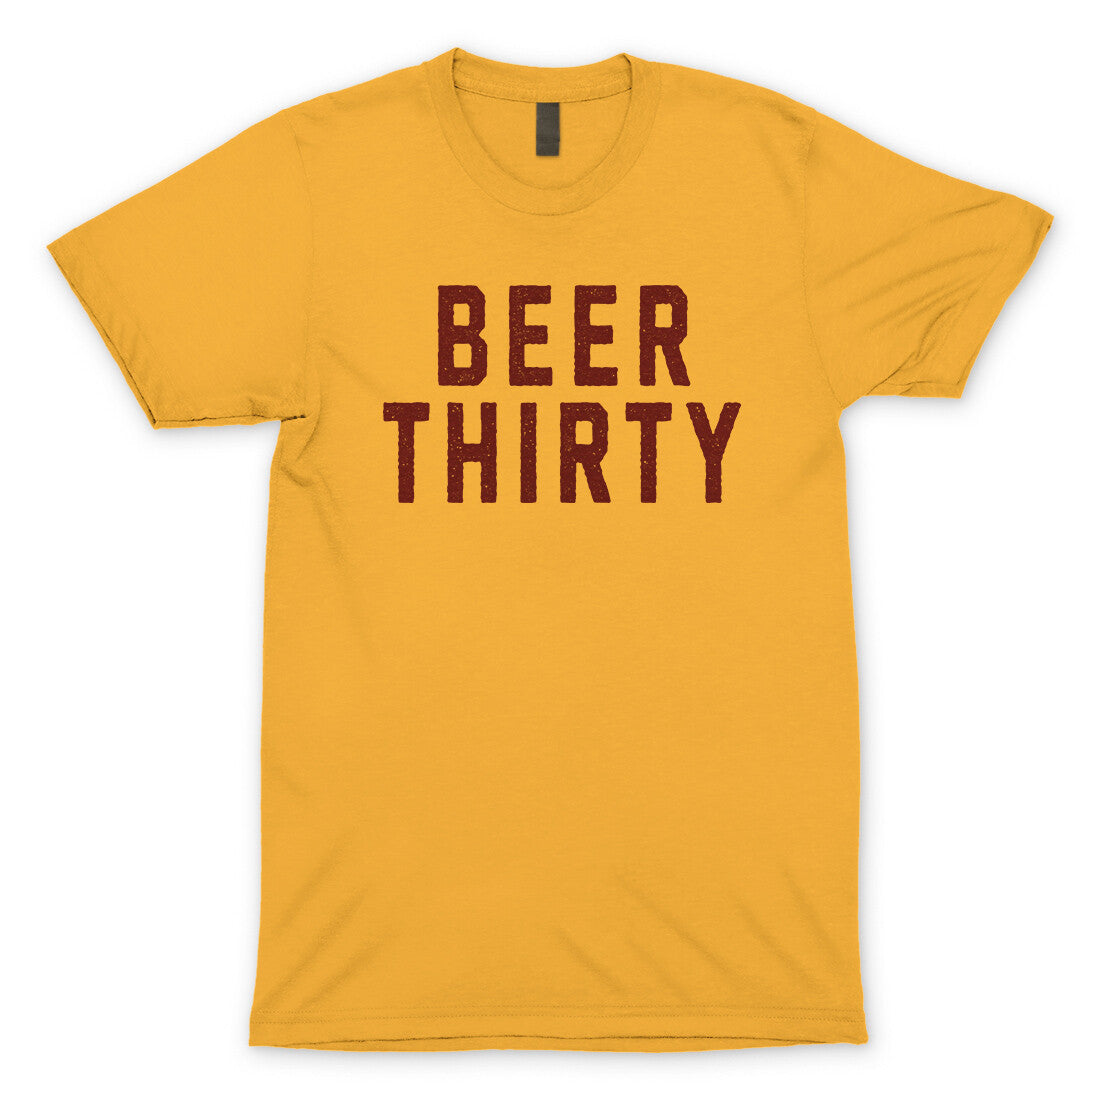 Beer Thirty in Gold Color